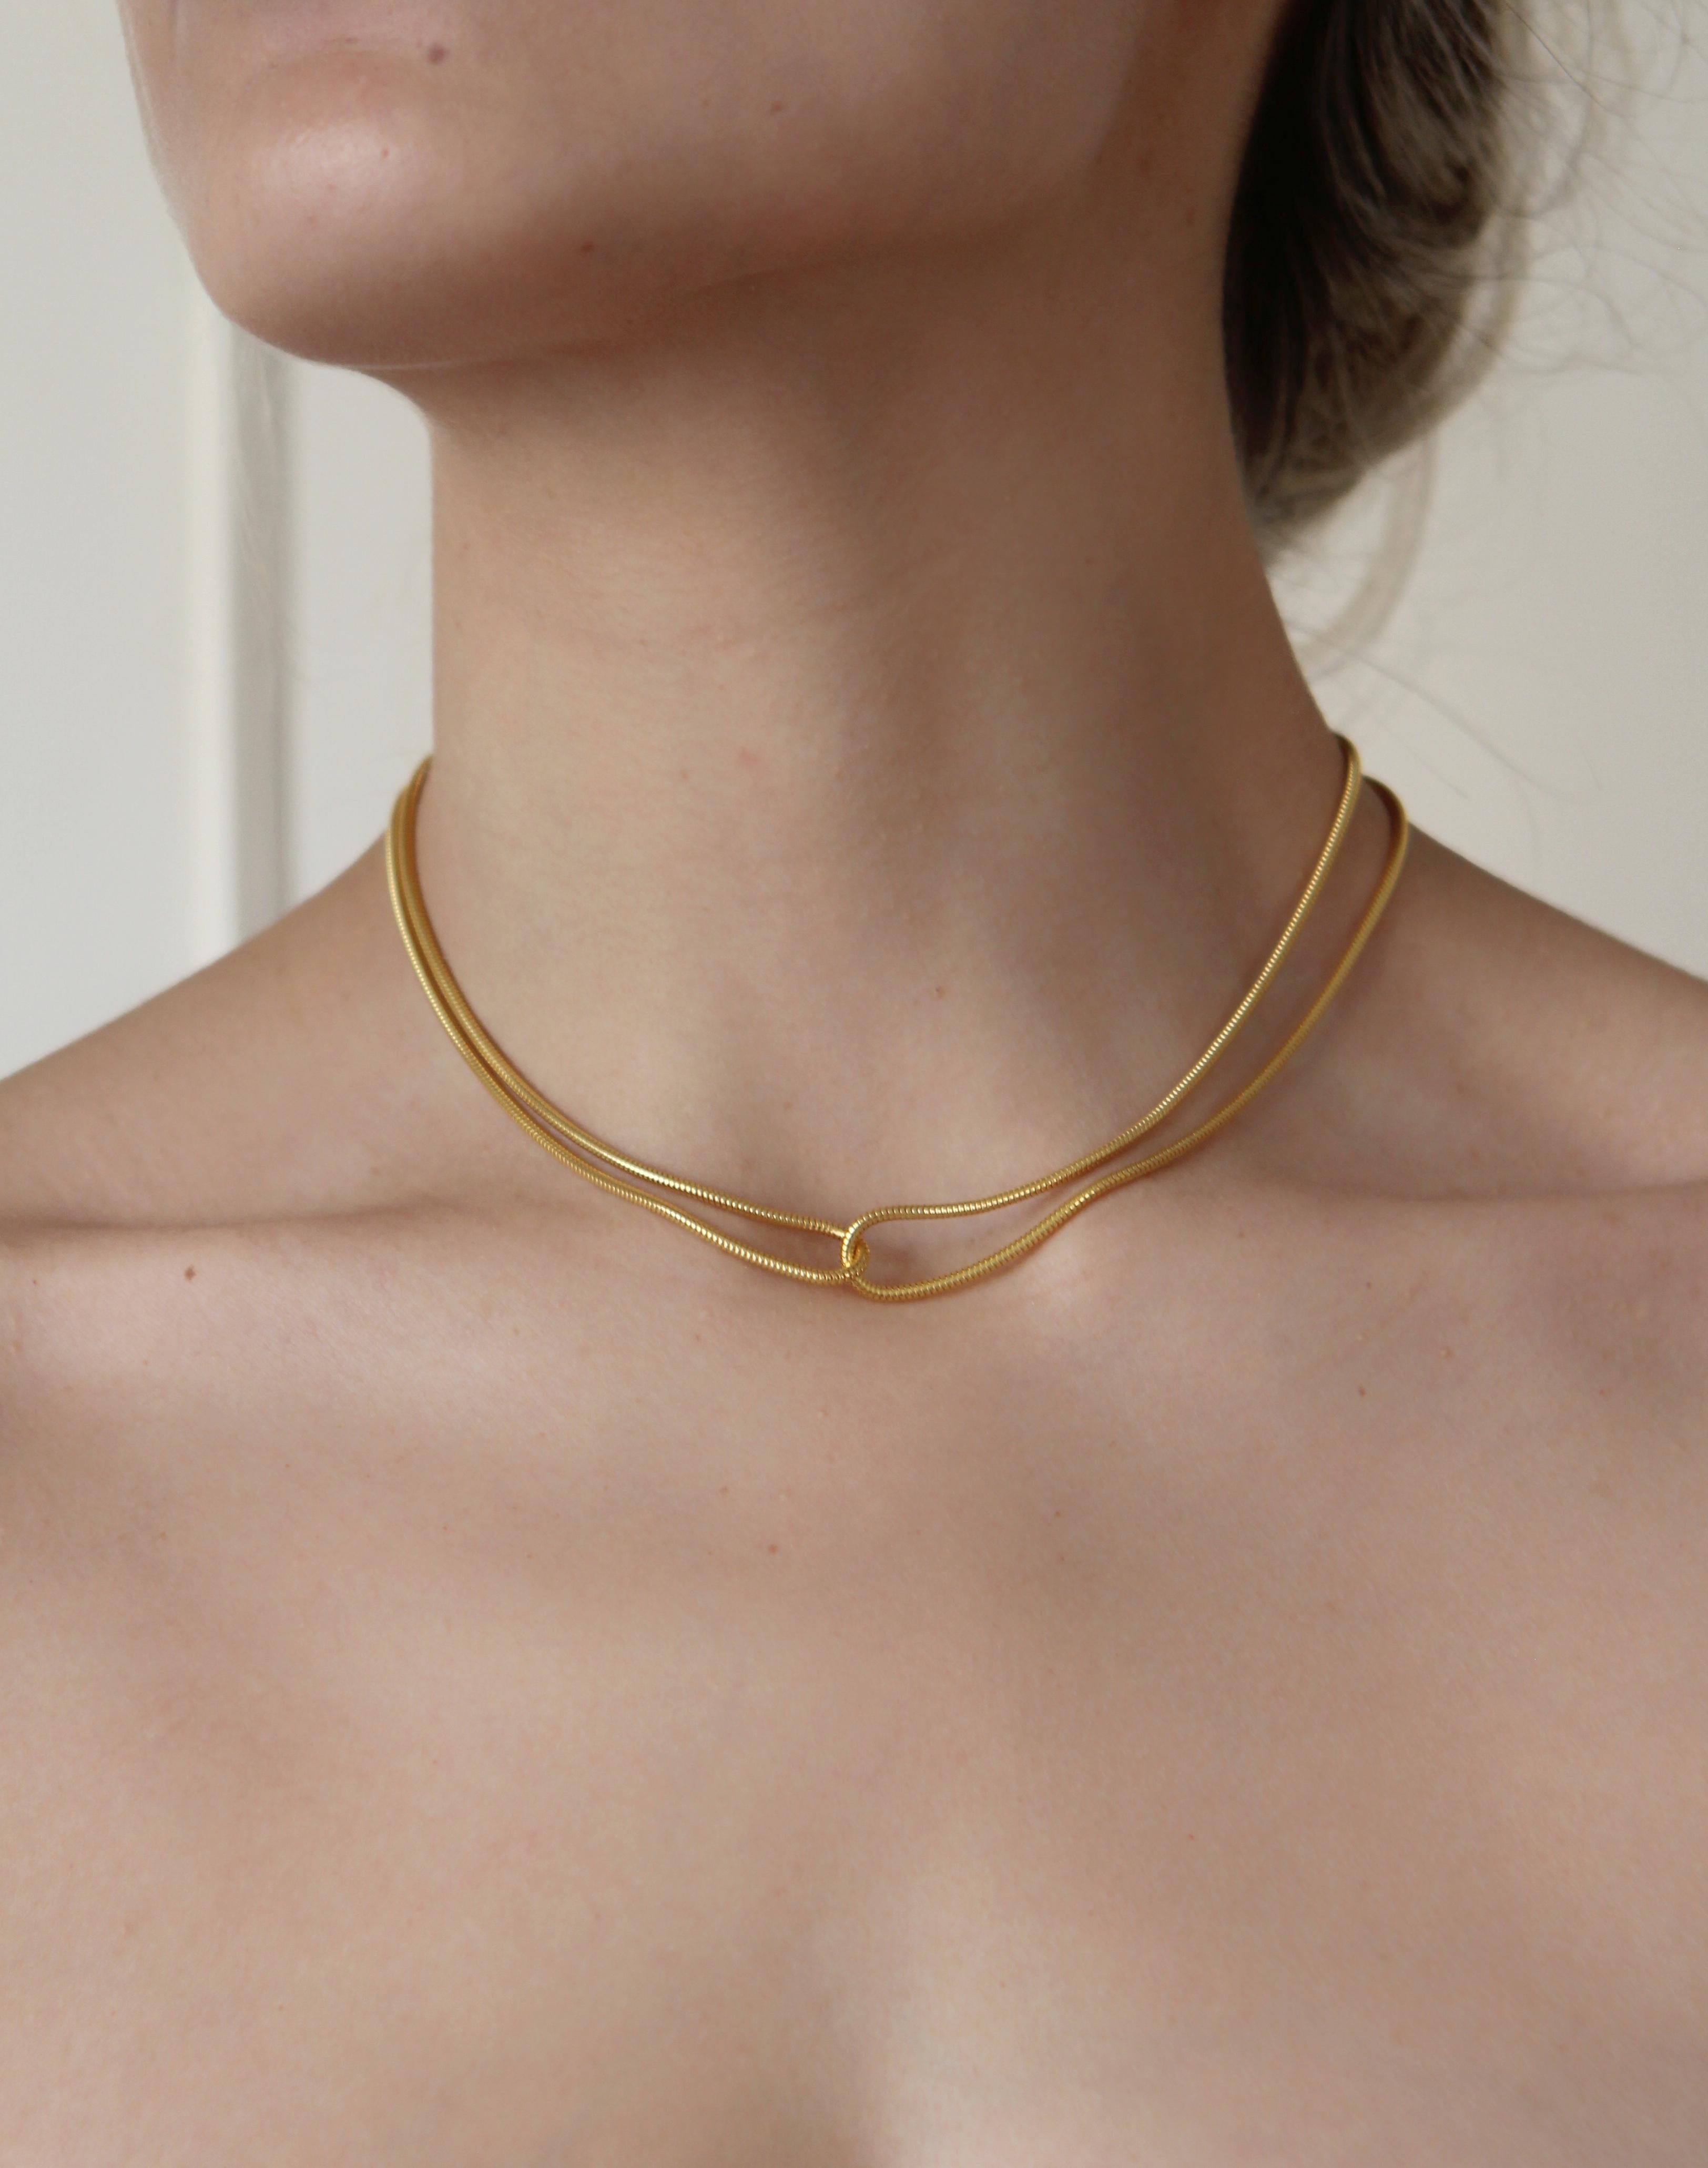  
This necklace  consists of two yellow gold chains looped through each other. This is a very graceful piece inspired by nature's delicate shapes and movement, bringing elegance to any outfit.

Hand-crafted by local skilled Greek craftsmen.

This